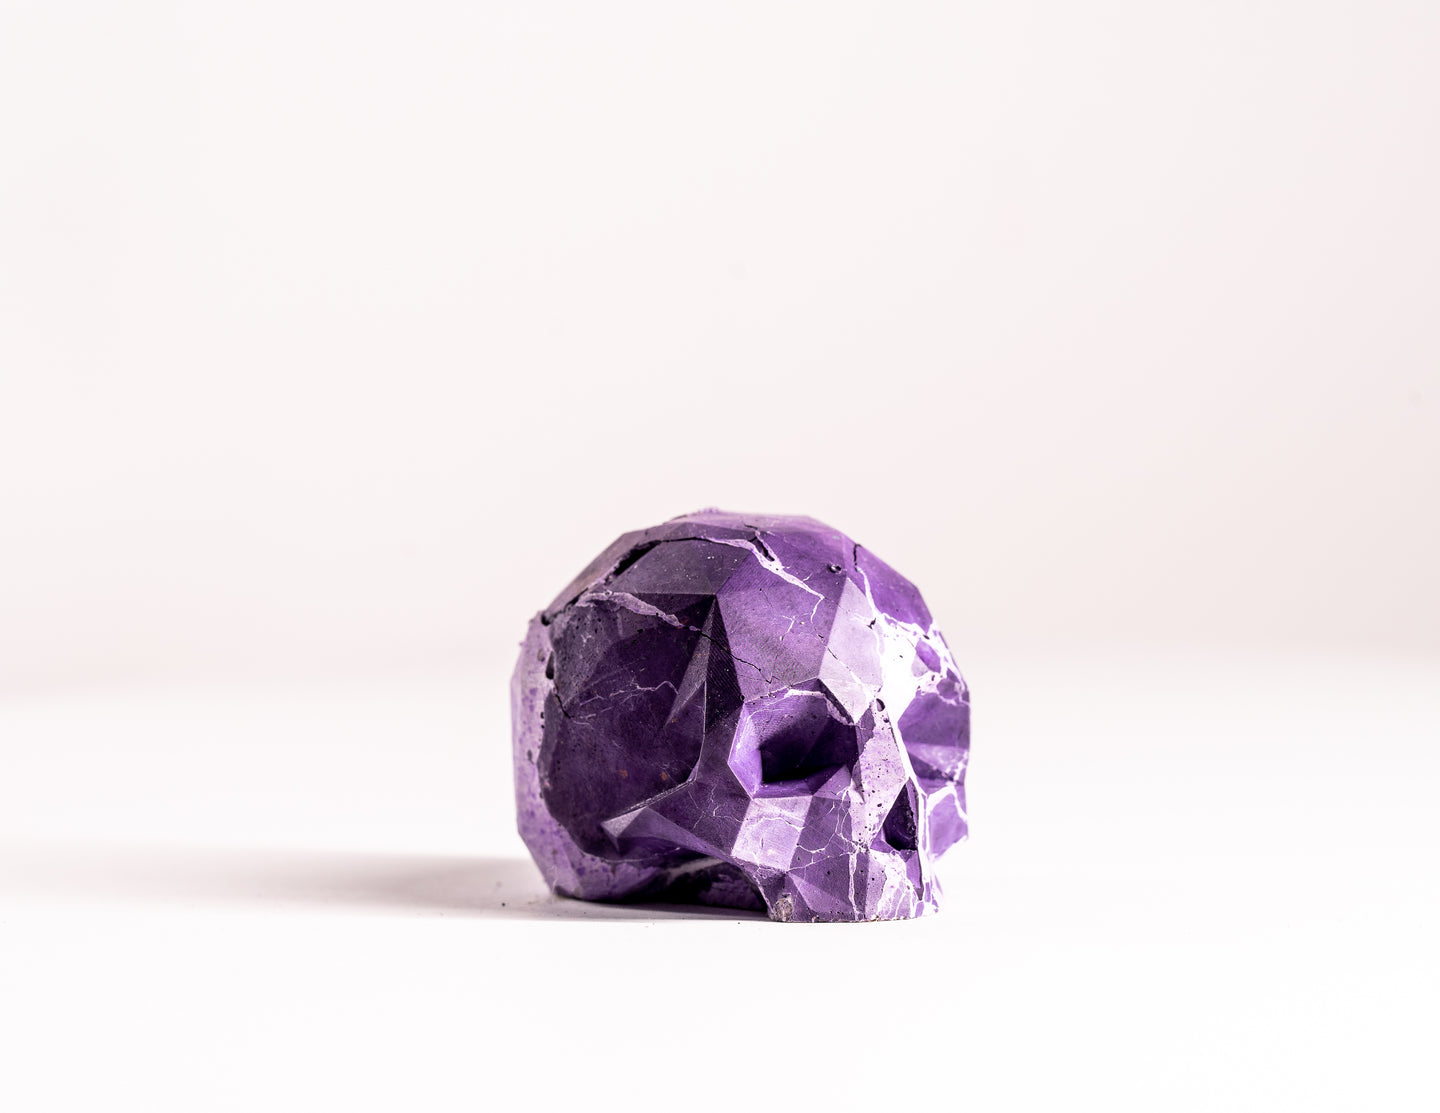 Mini Collectible Skull - Marbled - 148